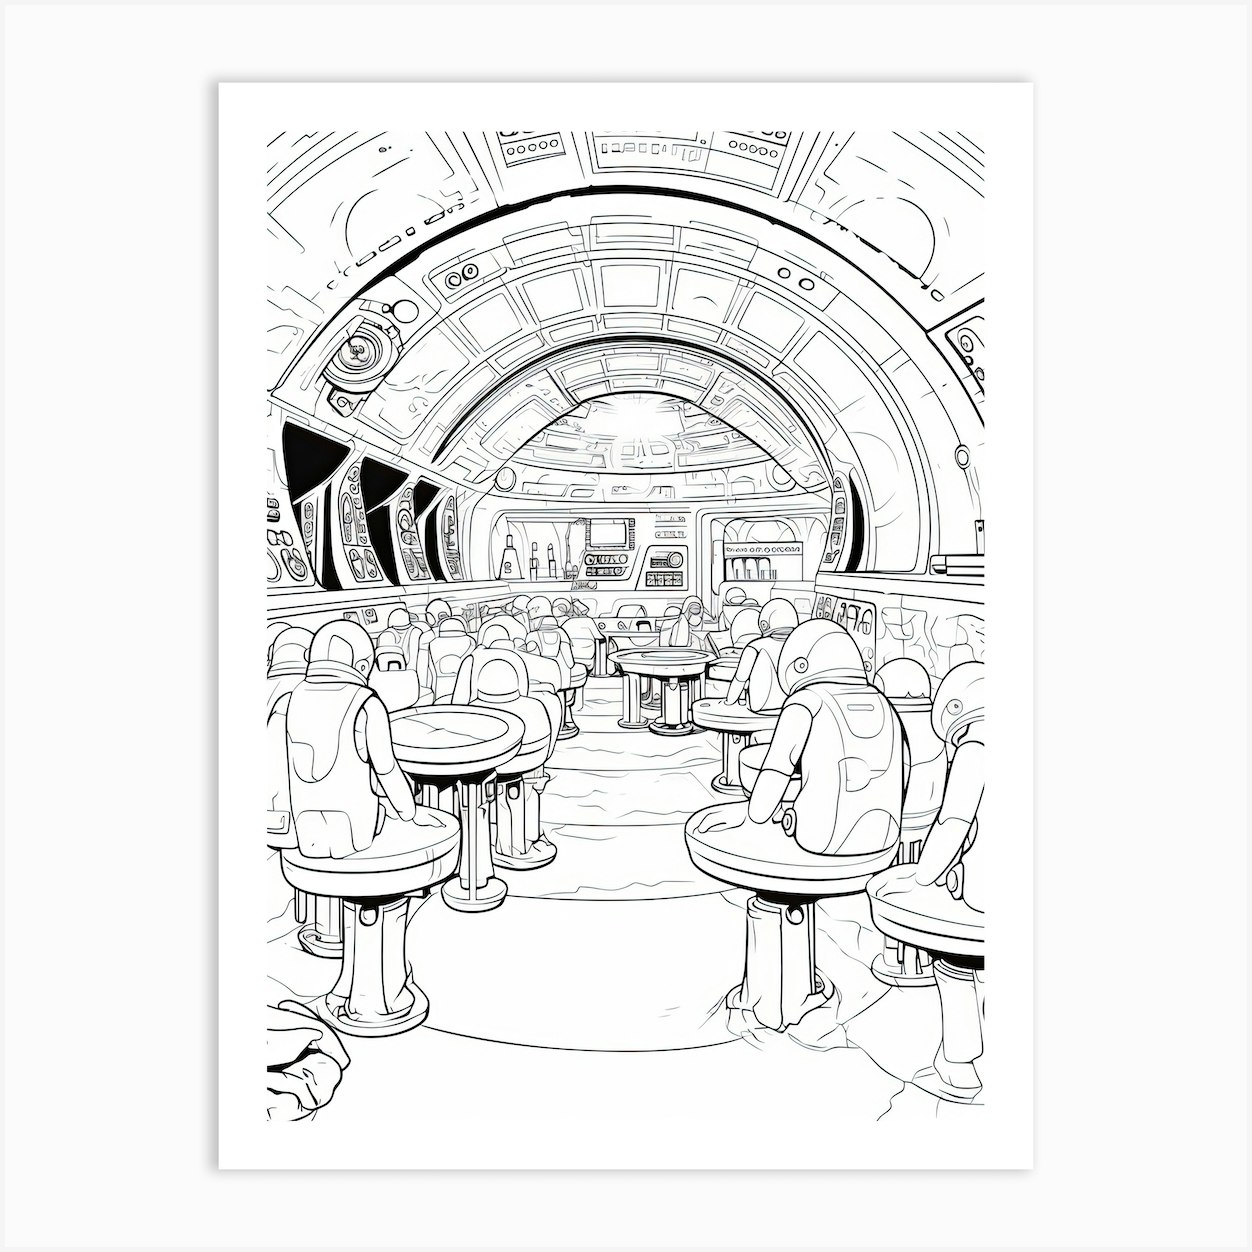 mos eisley and coloring pages